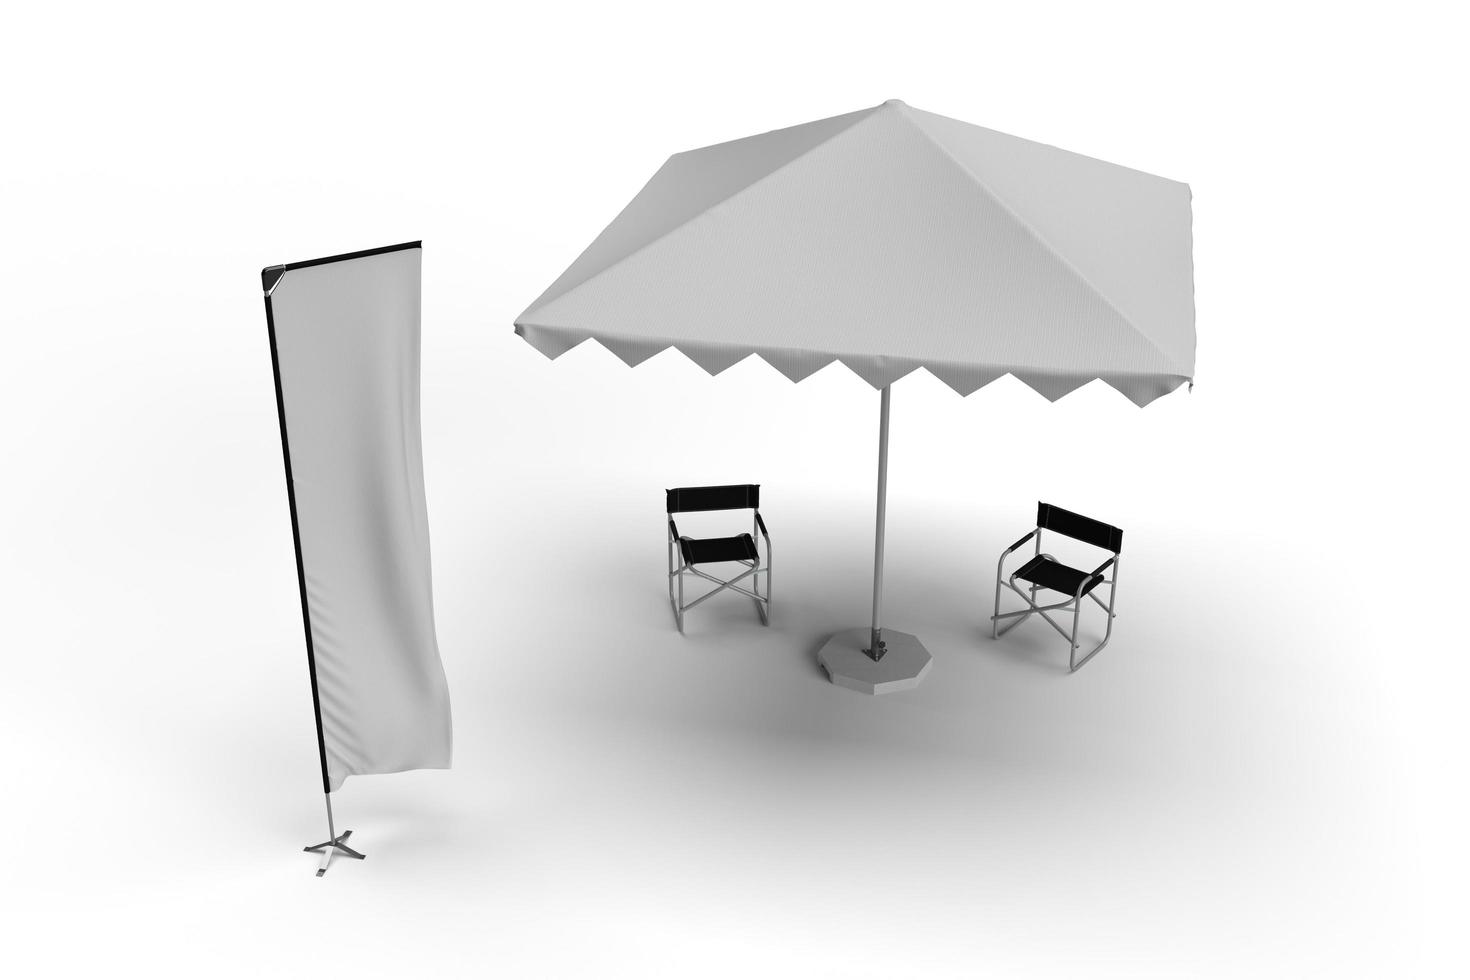 Exhibition Umbrella Parasol with two Director Chairs and a Teles photo